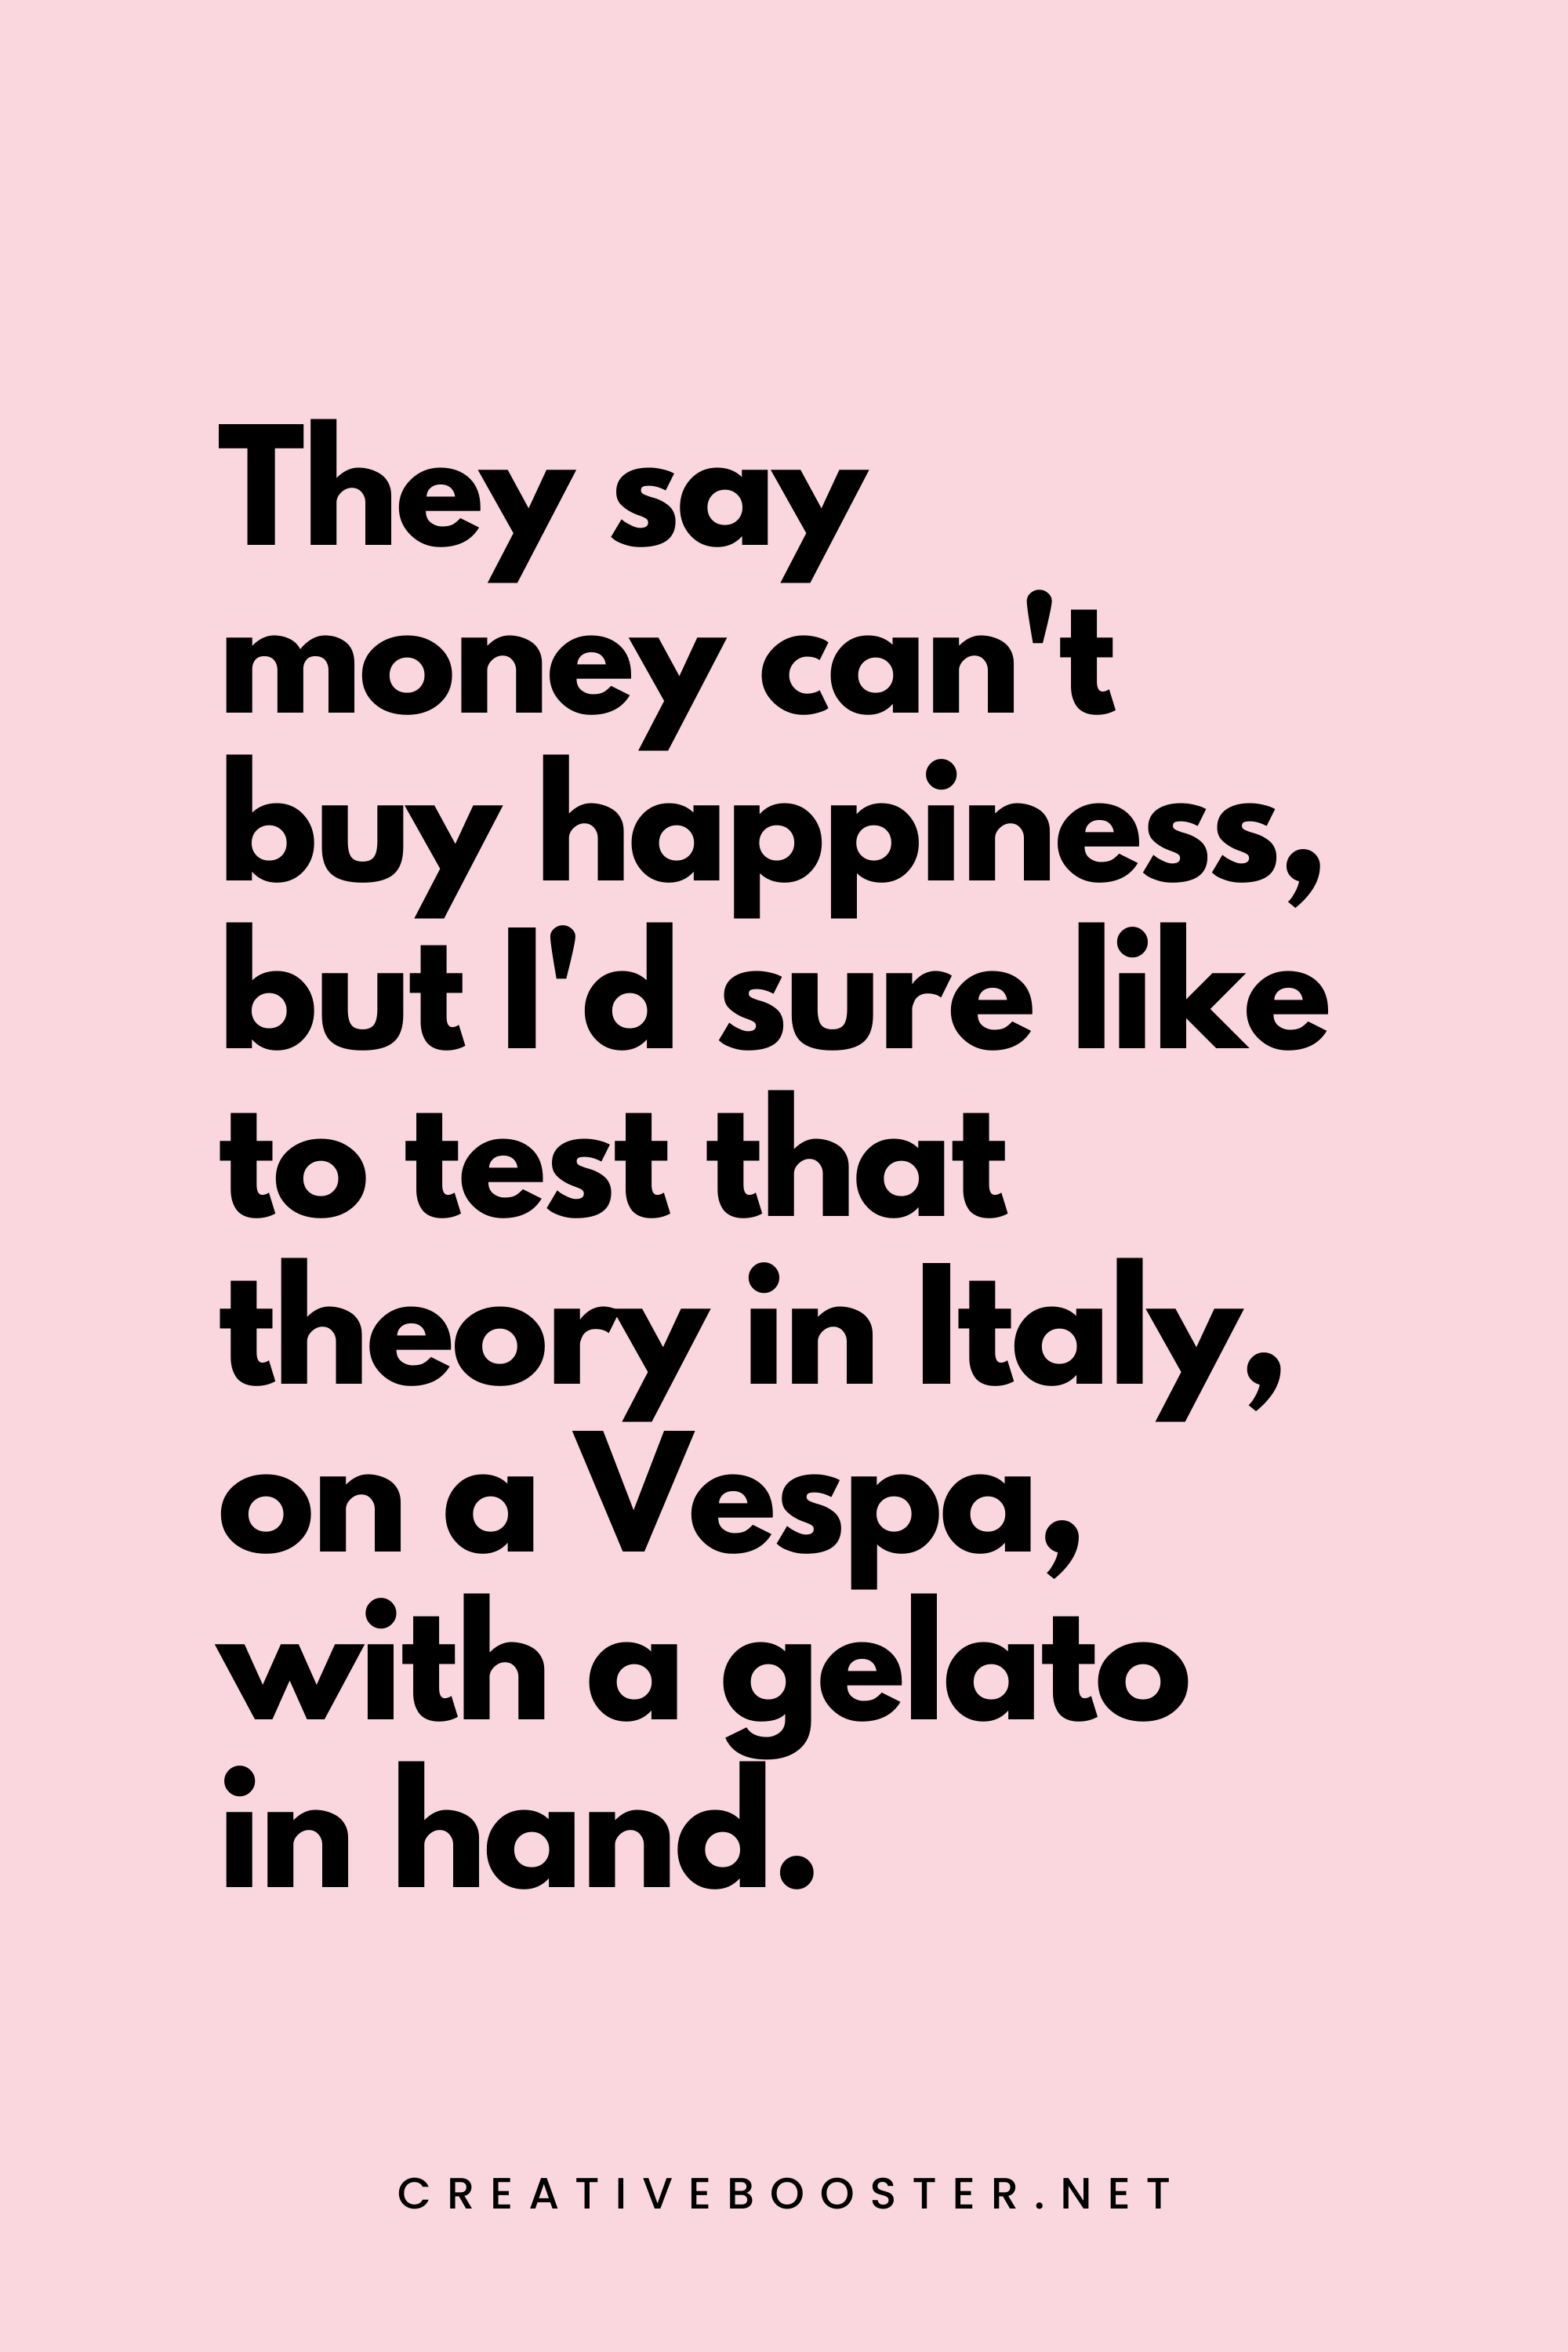 62. They say money can't buy happiness, but I'd sure like to test that theory in Italy, on a Vespa, with a gelato in hand. - Creativebooster.net - 6. Funny Financial Freedom Quotes